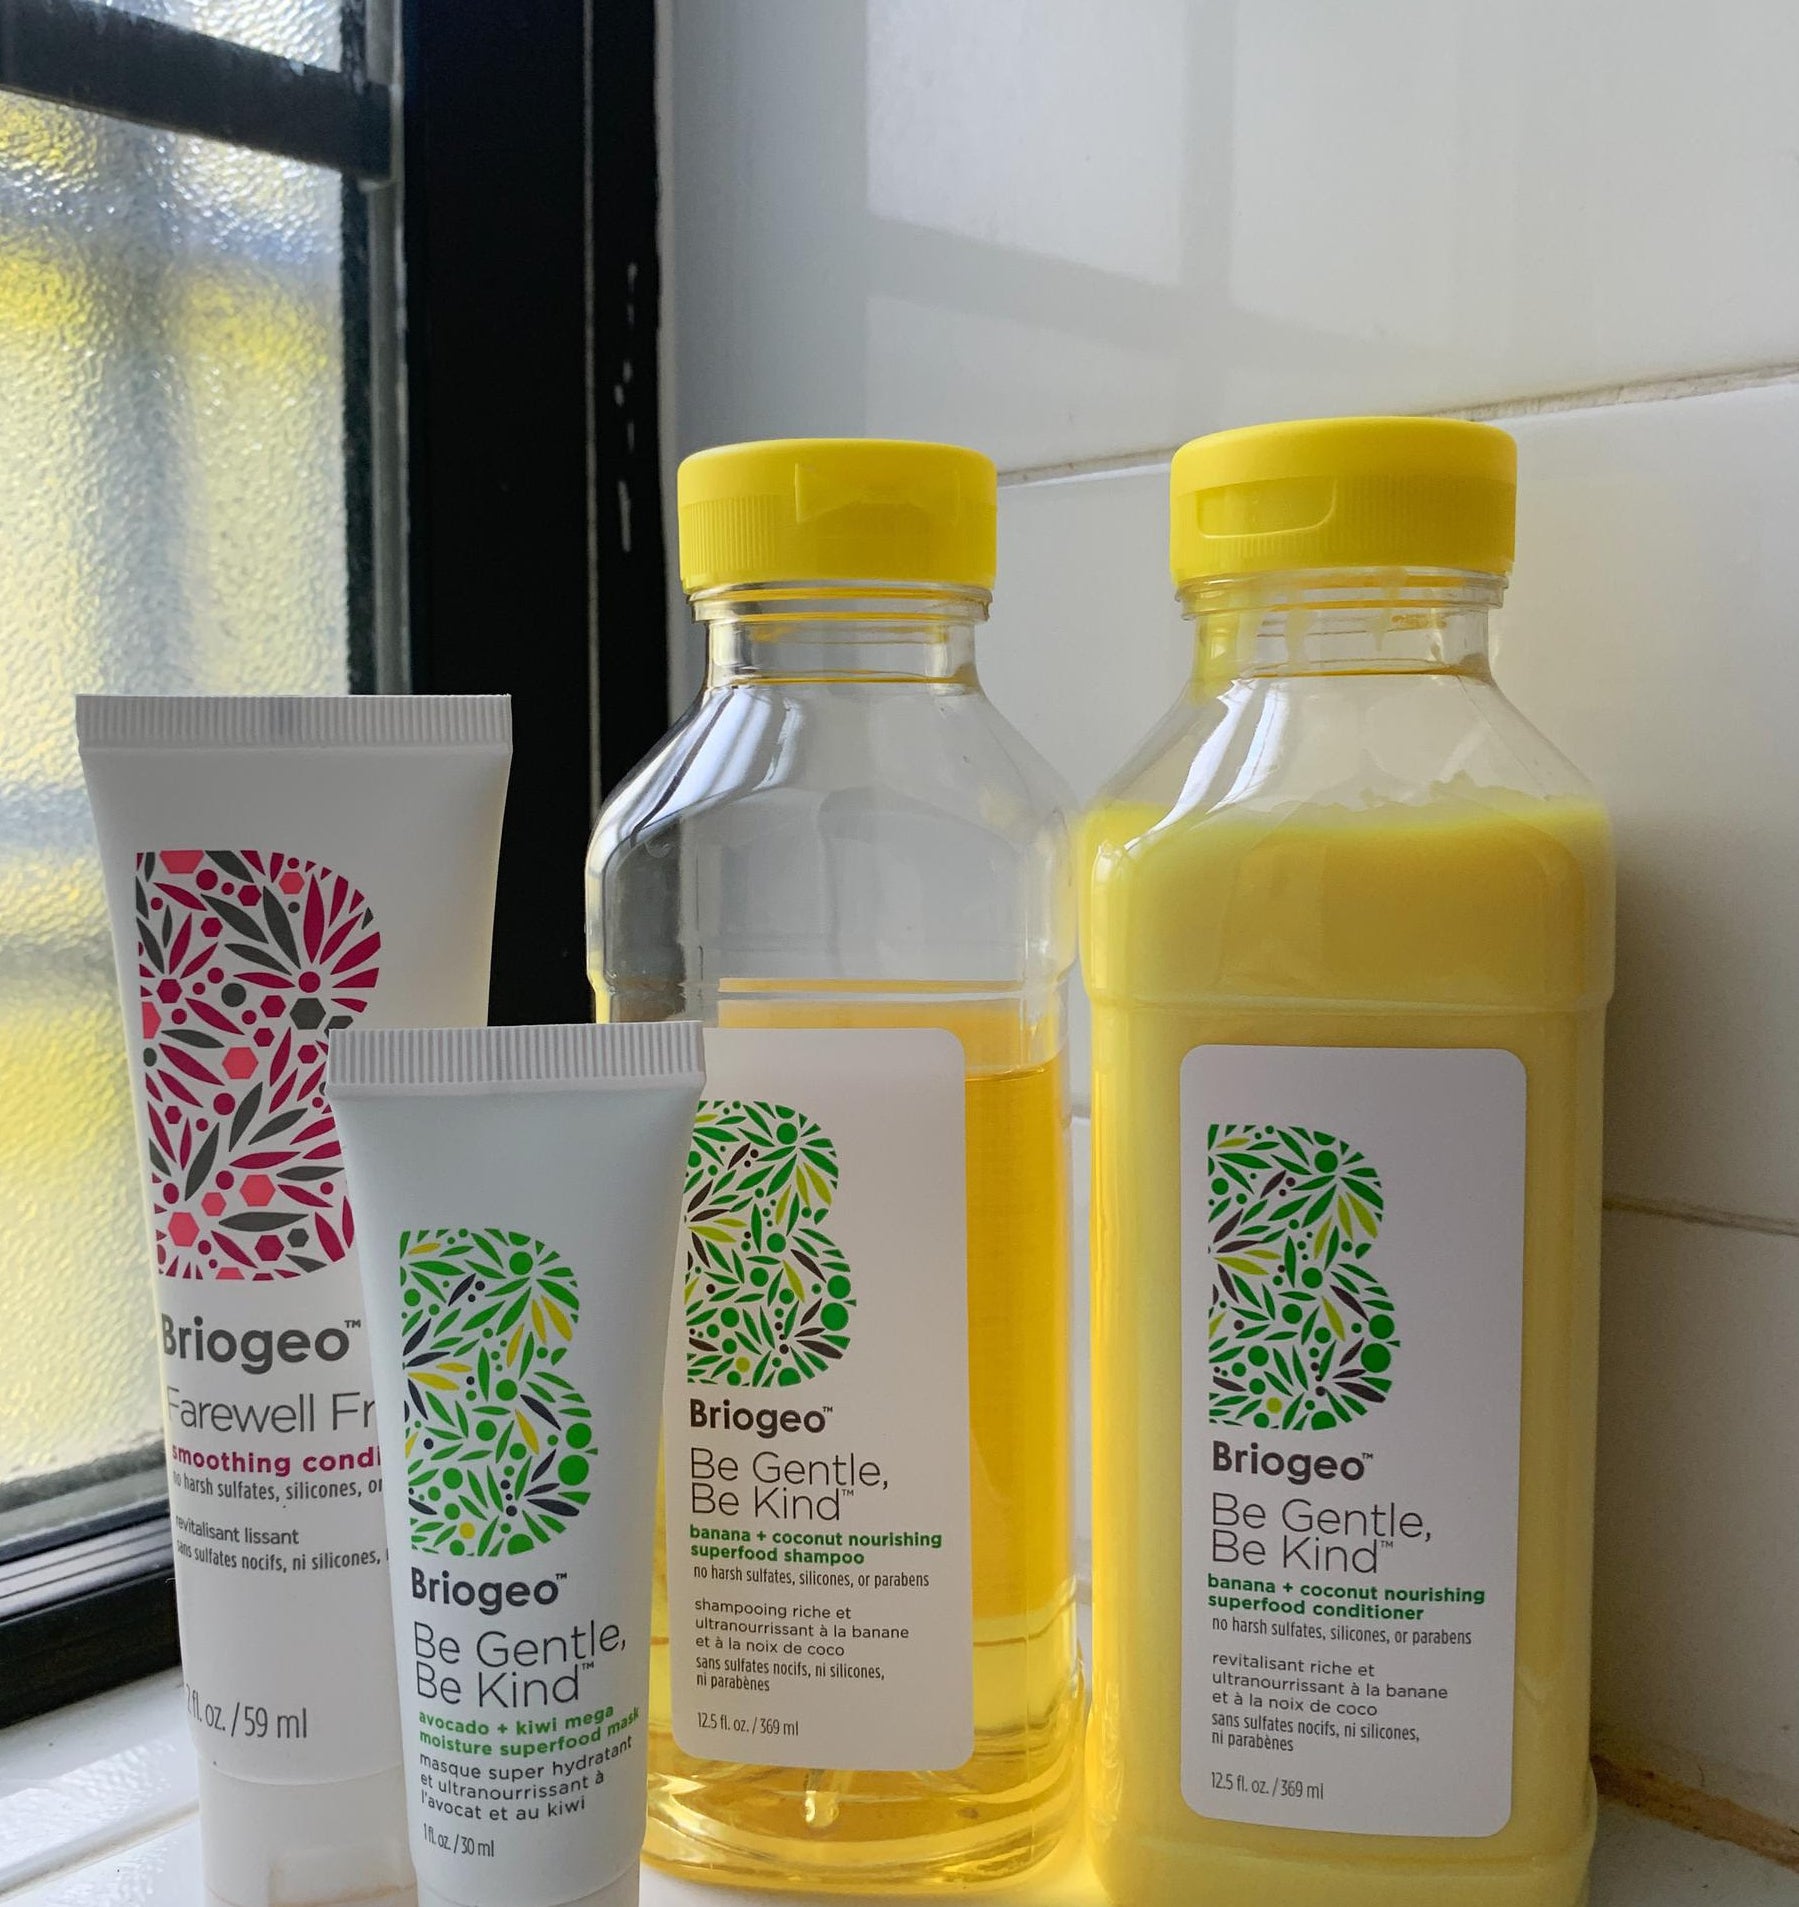 large bottles of yellow shampoo and conditioner with 2 other briogeo products